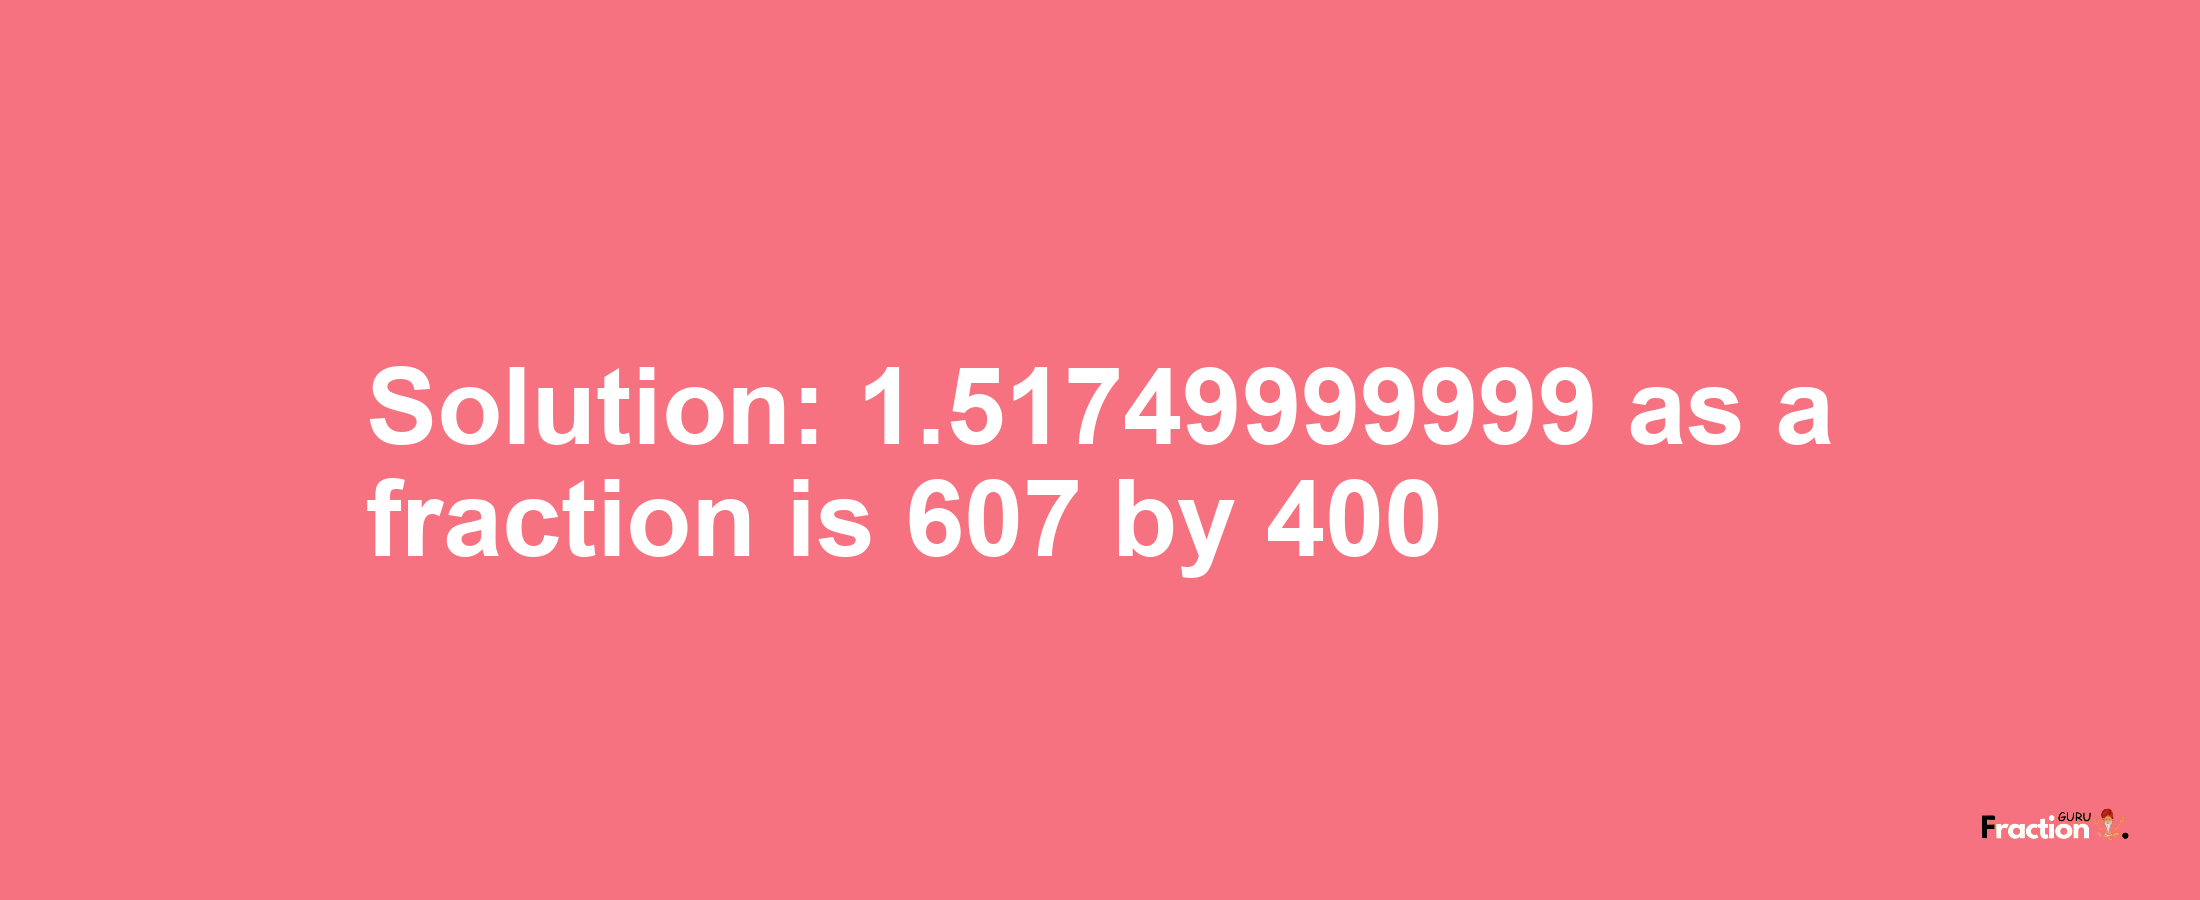 Solution:1.51749999999 as a fraction is 607/400